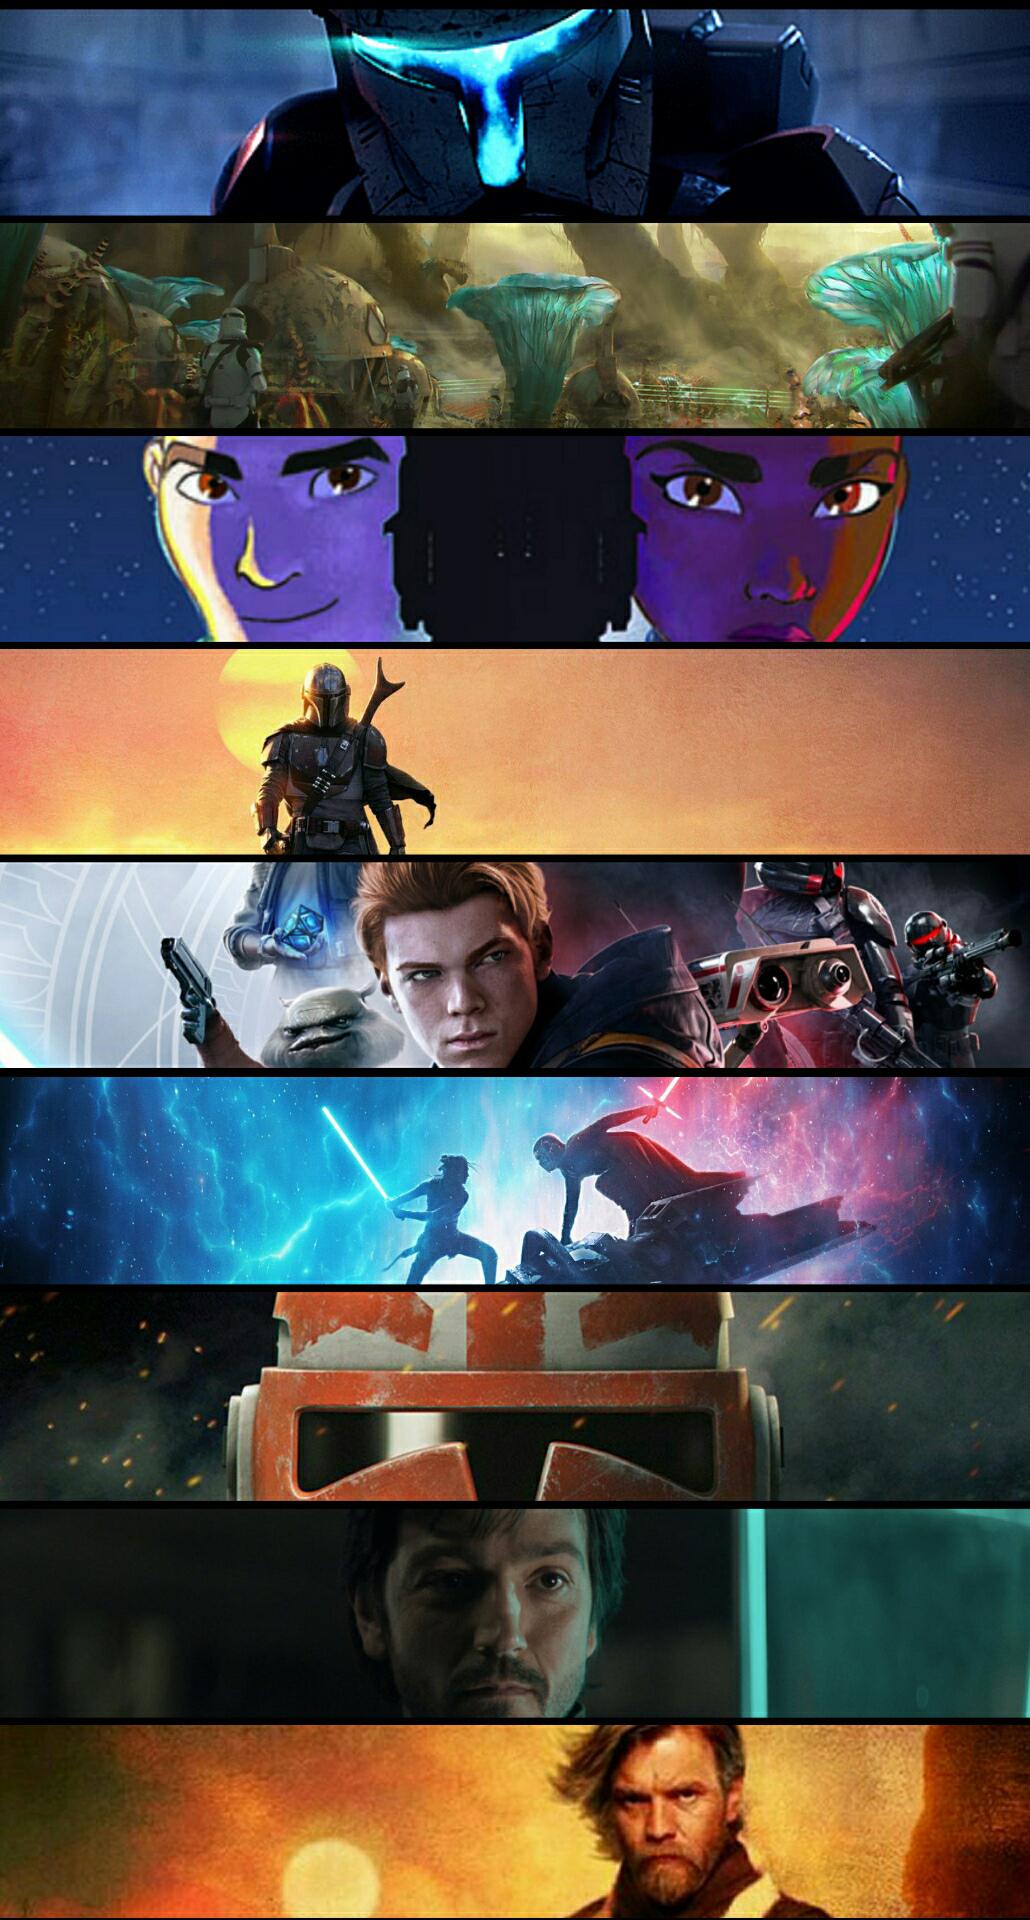 Star Wars projects phone wallpaper